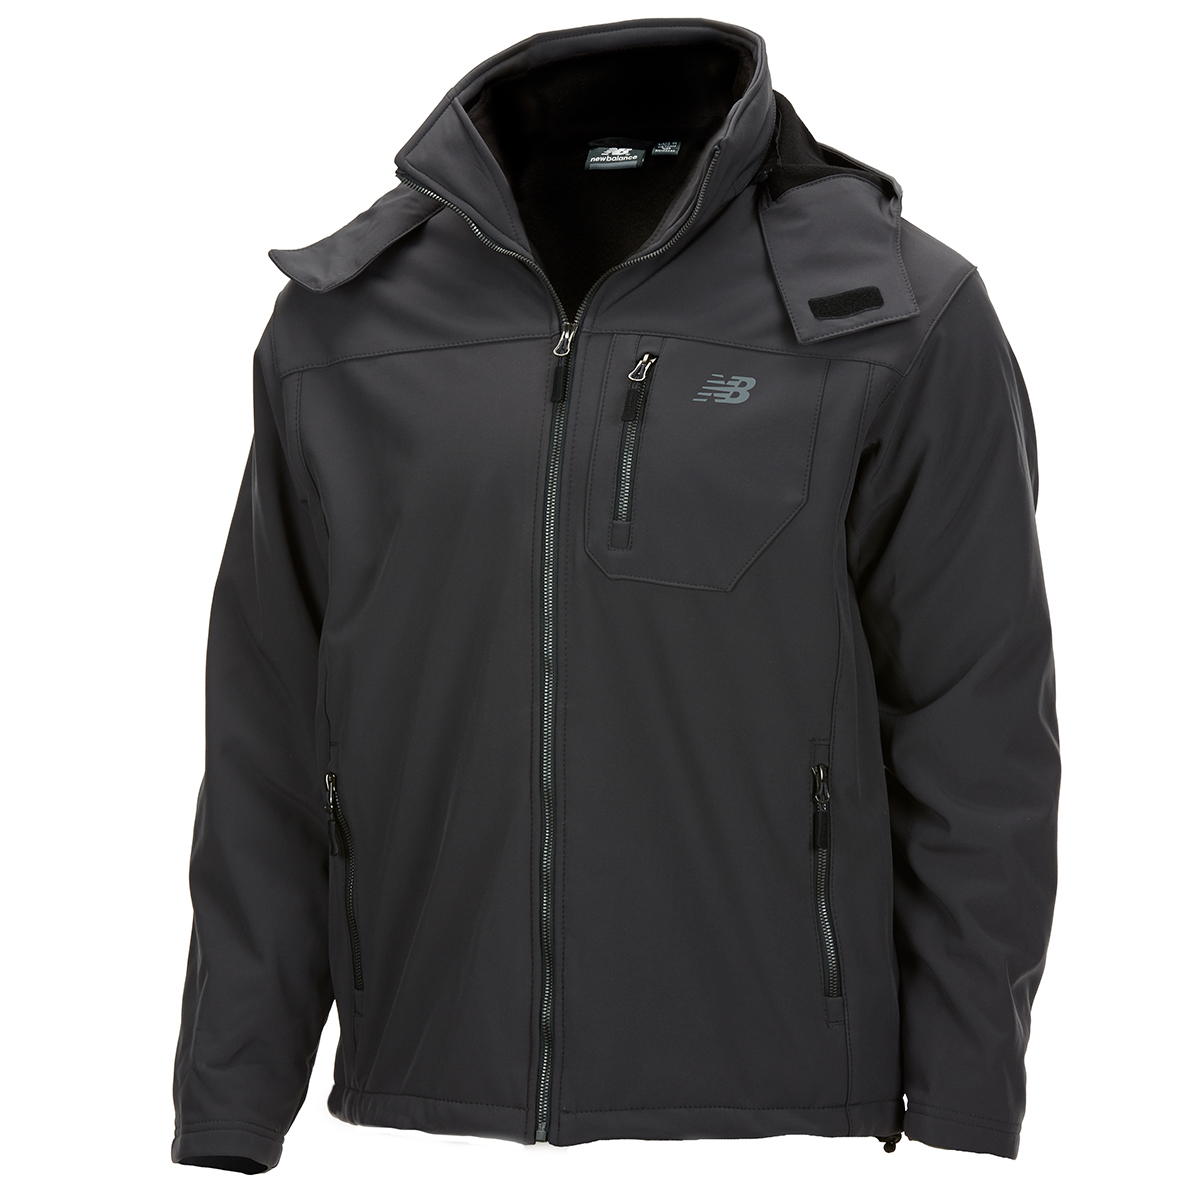 New Balance Men's Soft Shell Systems Jacket With Zip-Out Puffer - Black, L